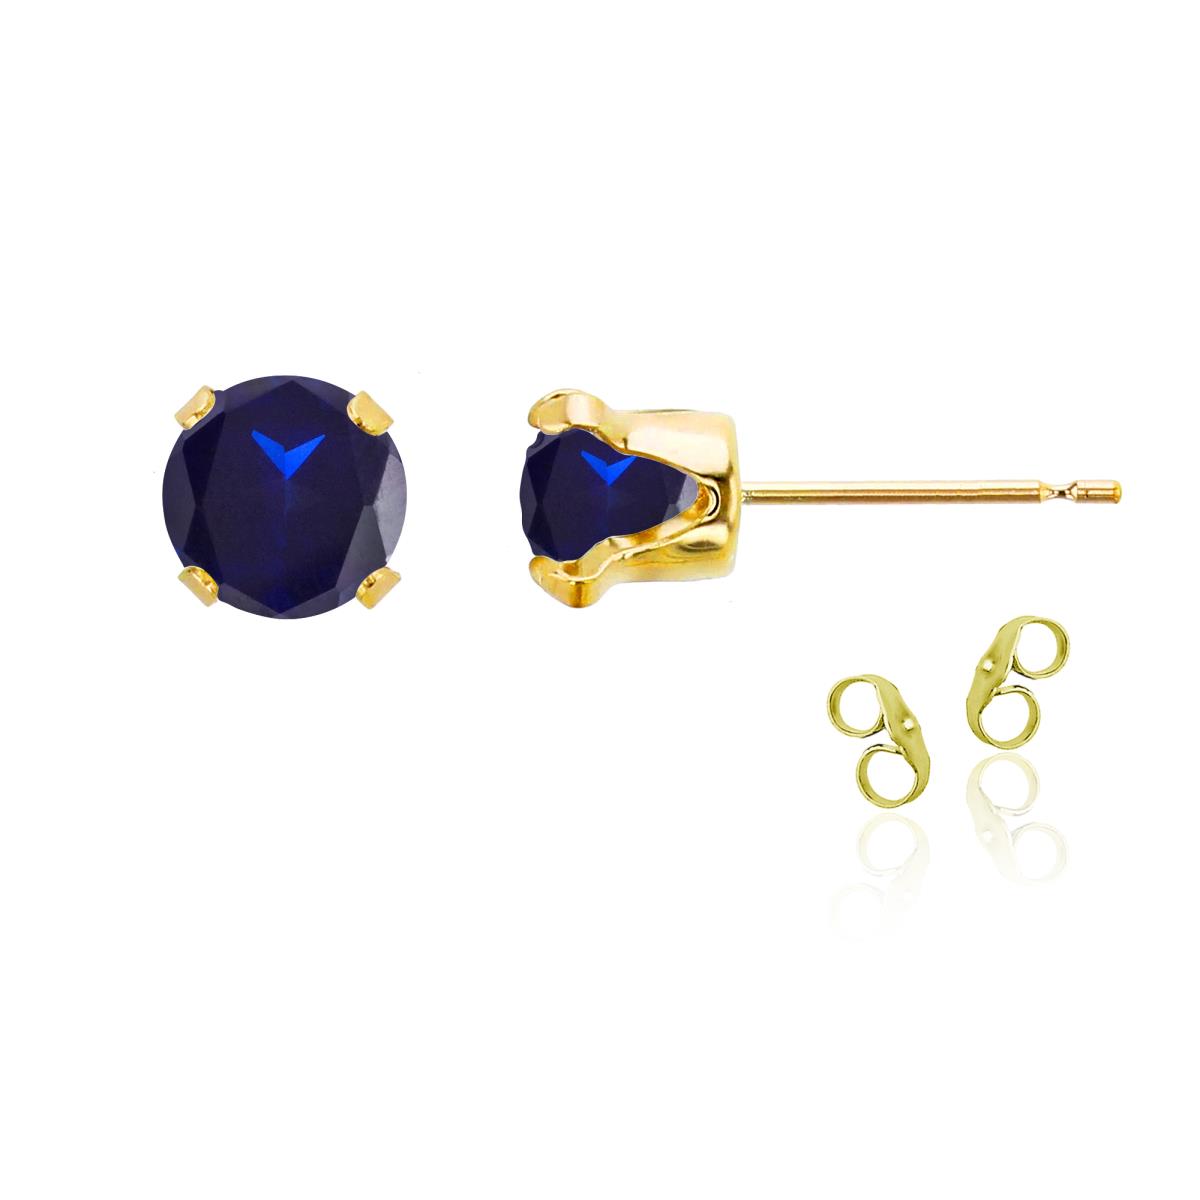 Sterling Silver Yellow 6mm Round Cr Blue Sapphire Stud Earring with Clutch